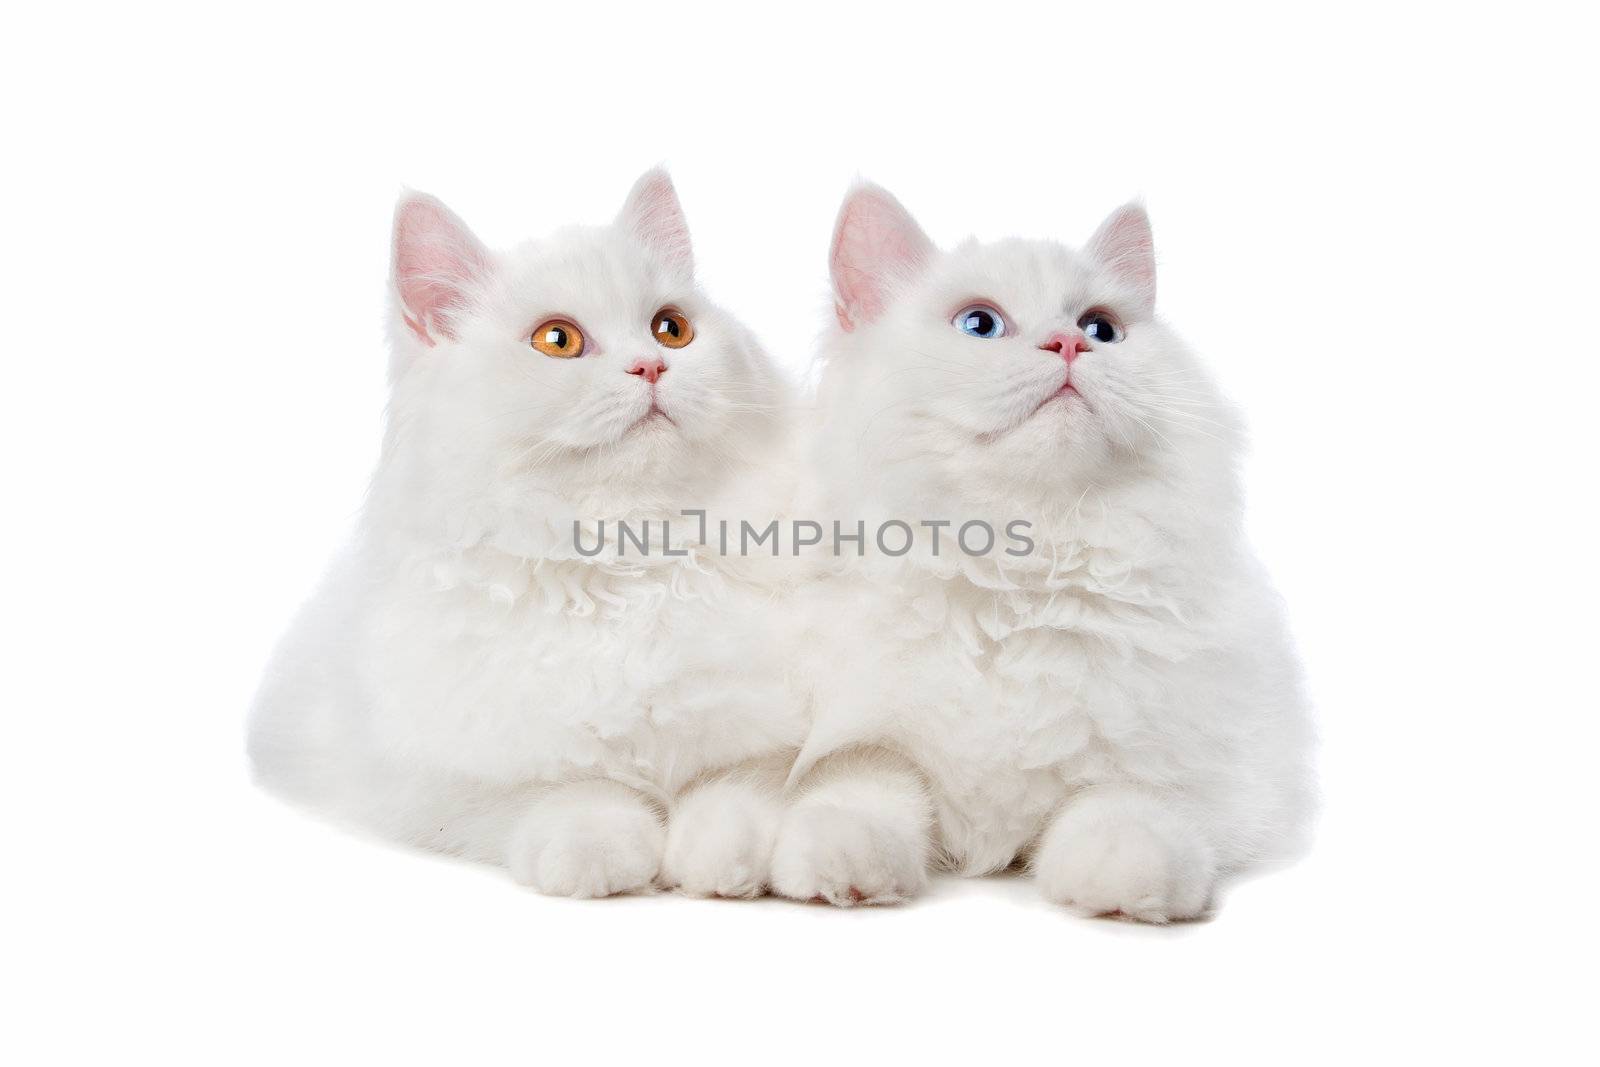 two White cats with blue and yellow eyes by eriklam